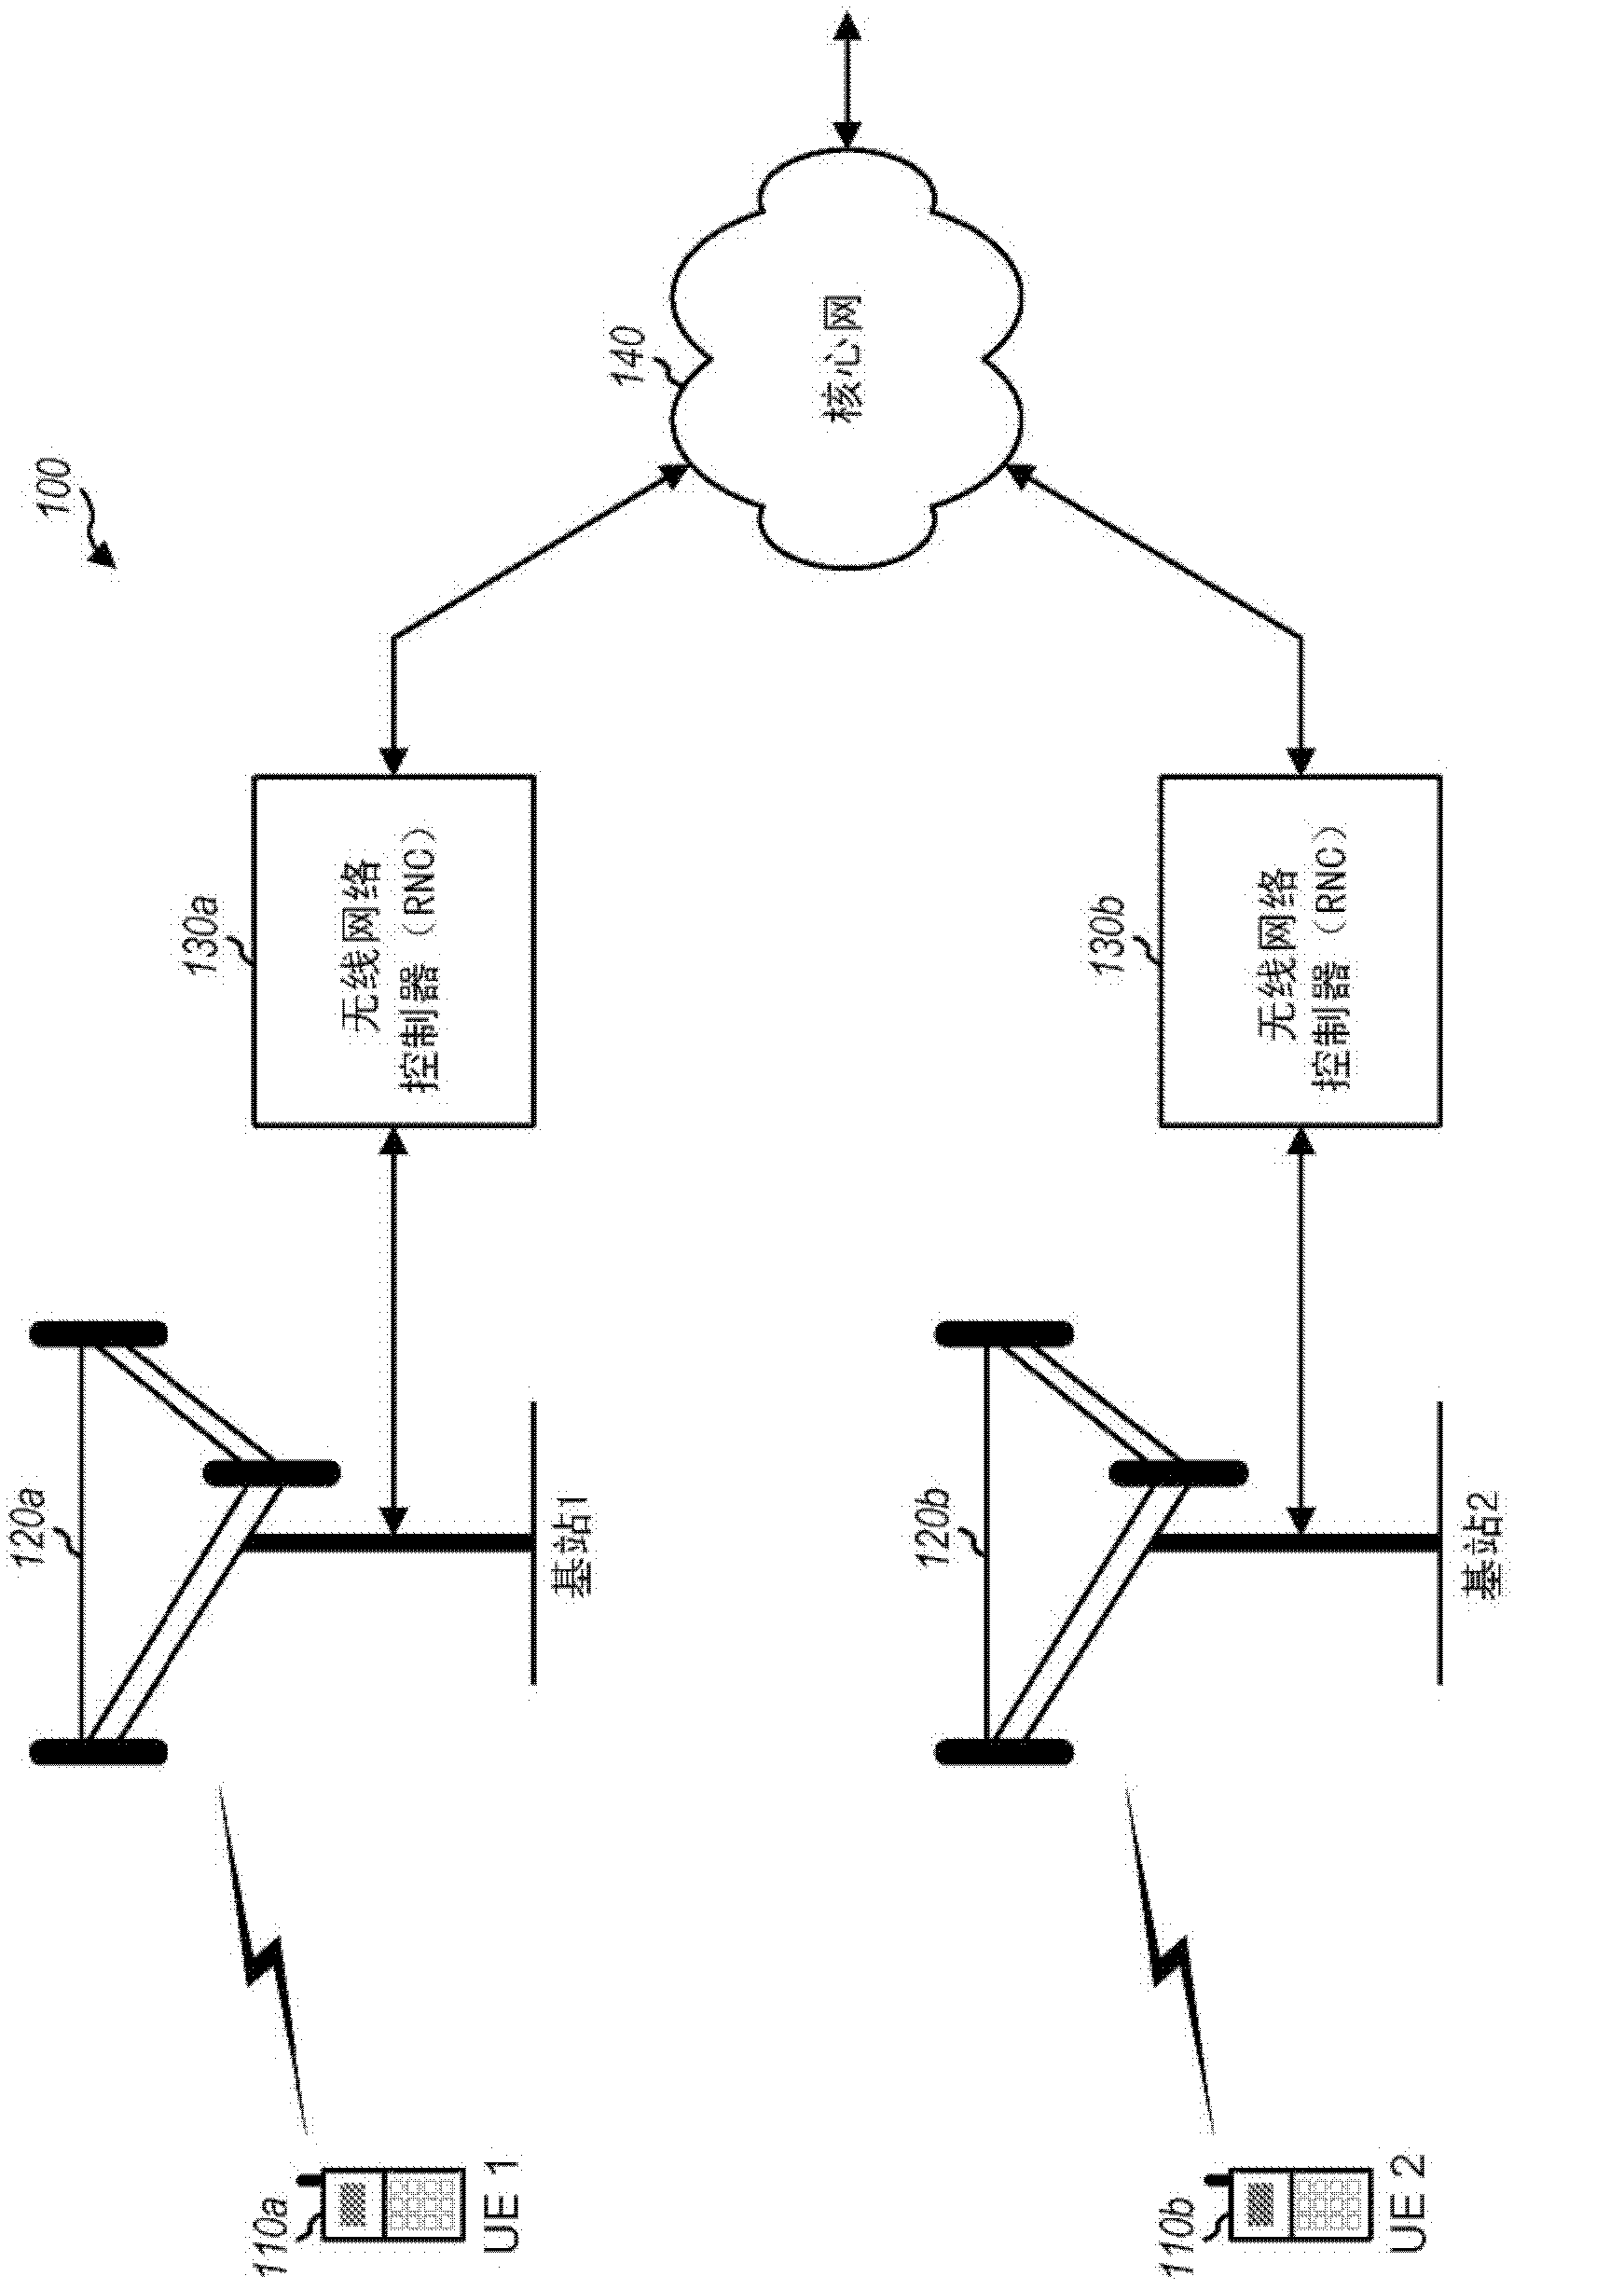 Transmission of control information across multiple packets